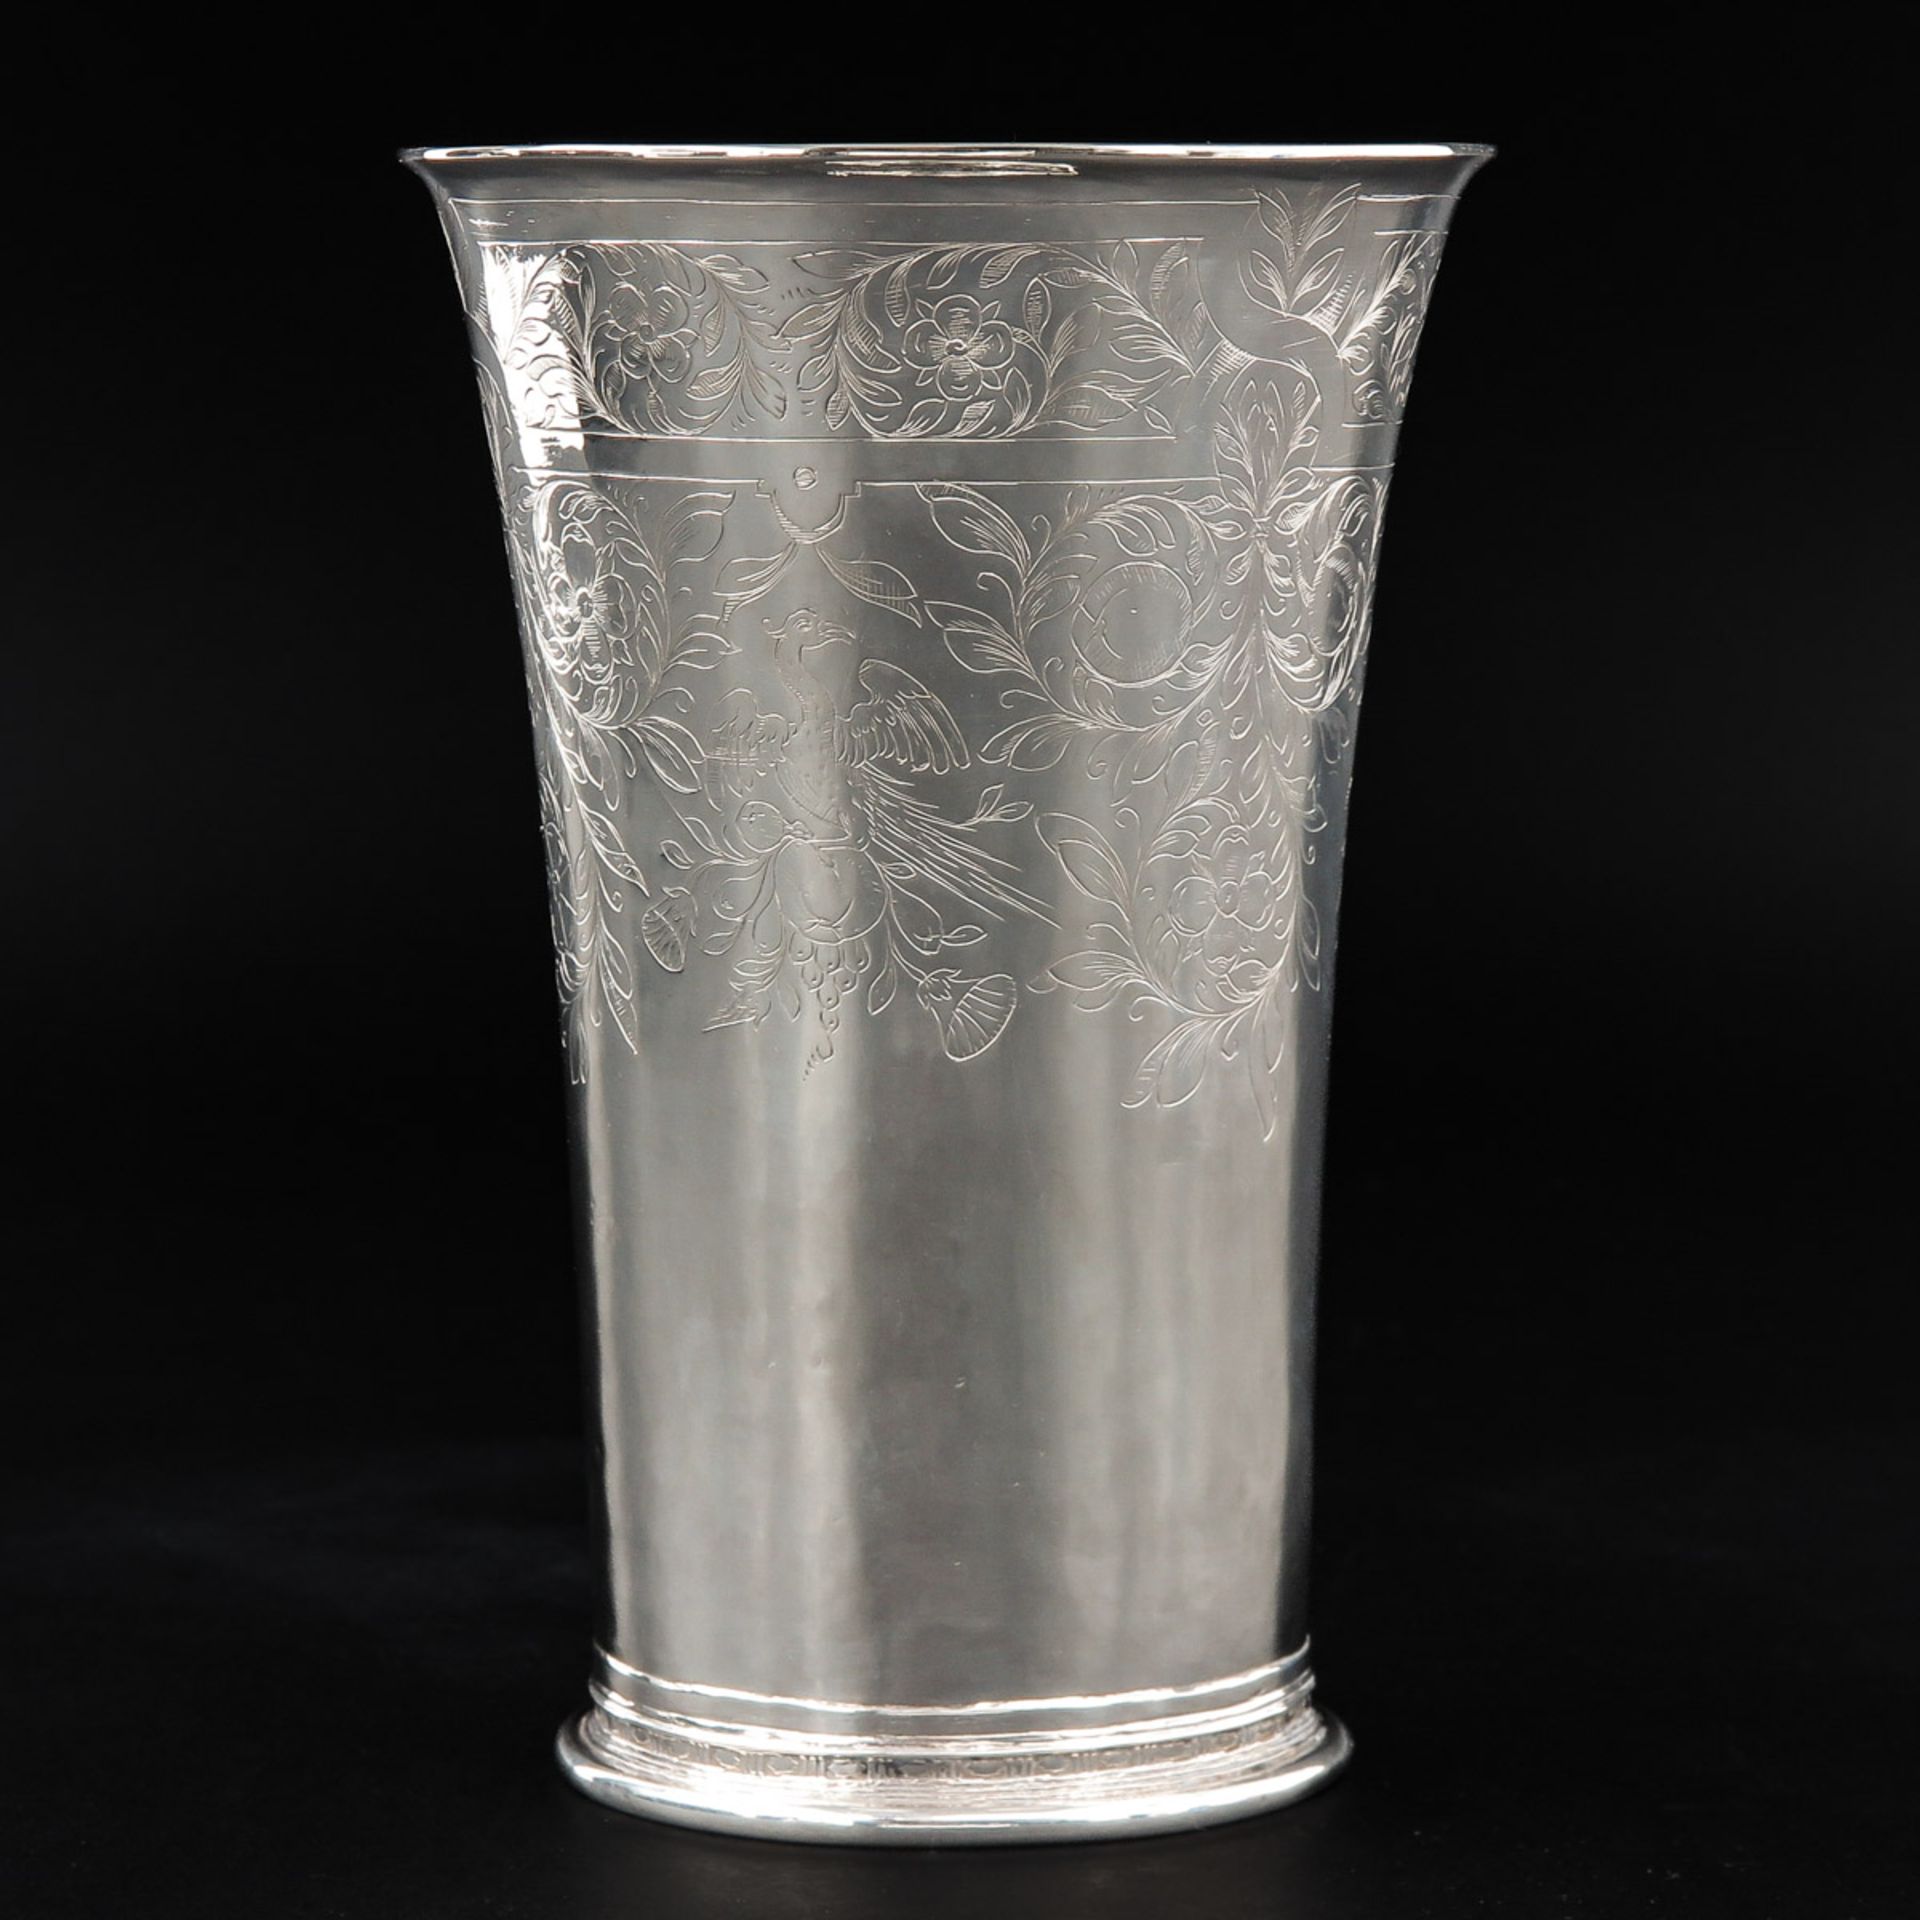 A 17th Century Dutch Silver Communion Cup - Image 4 of 8